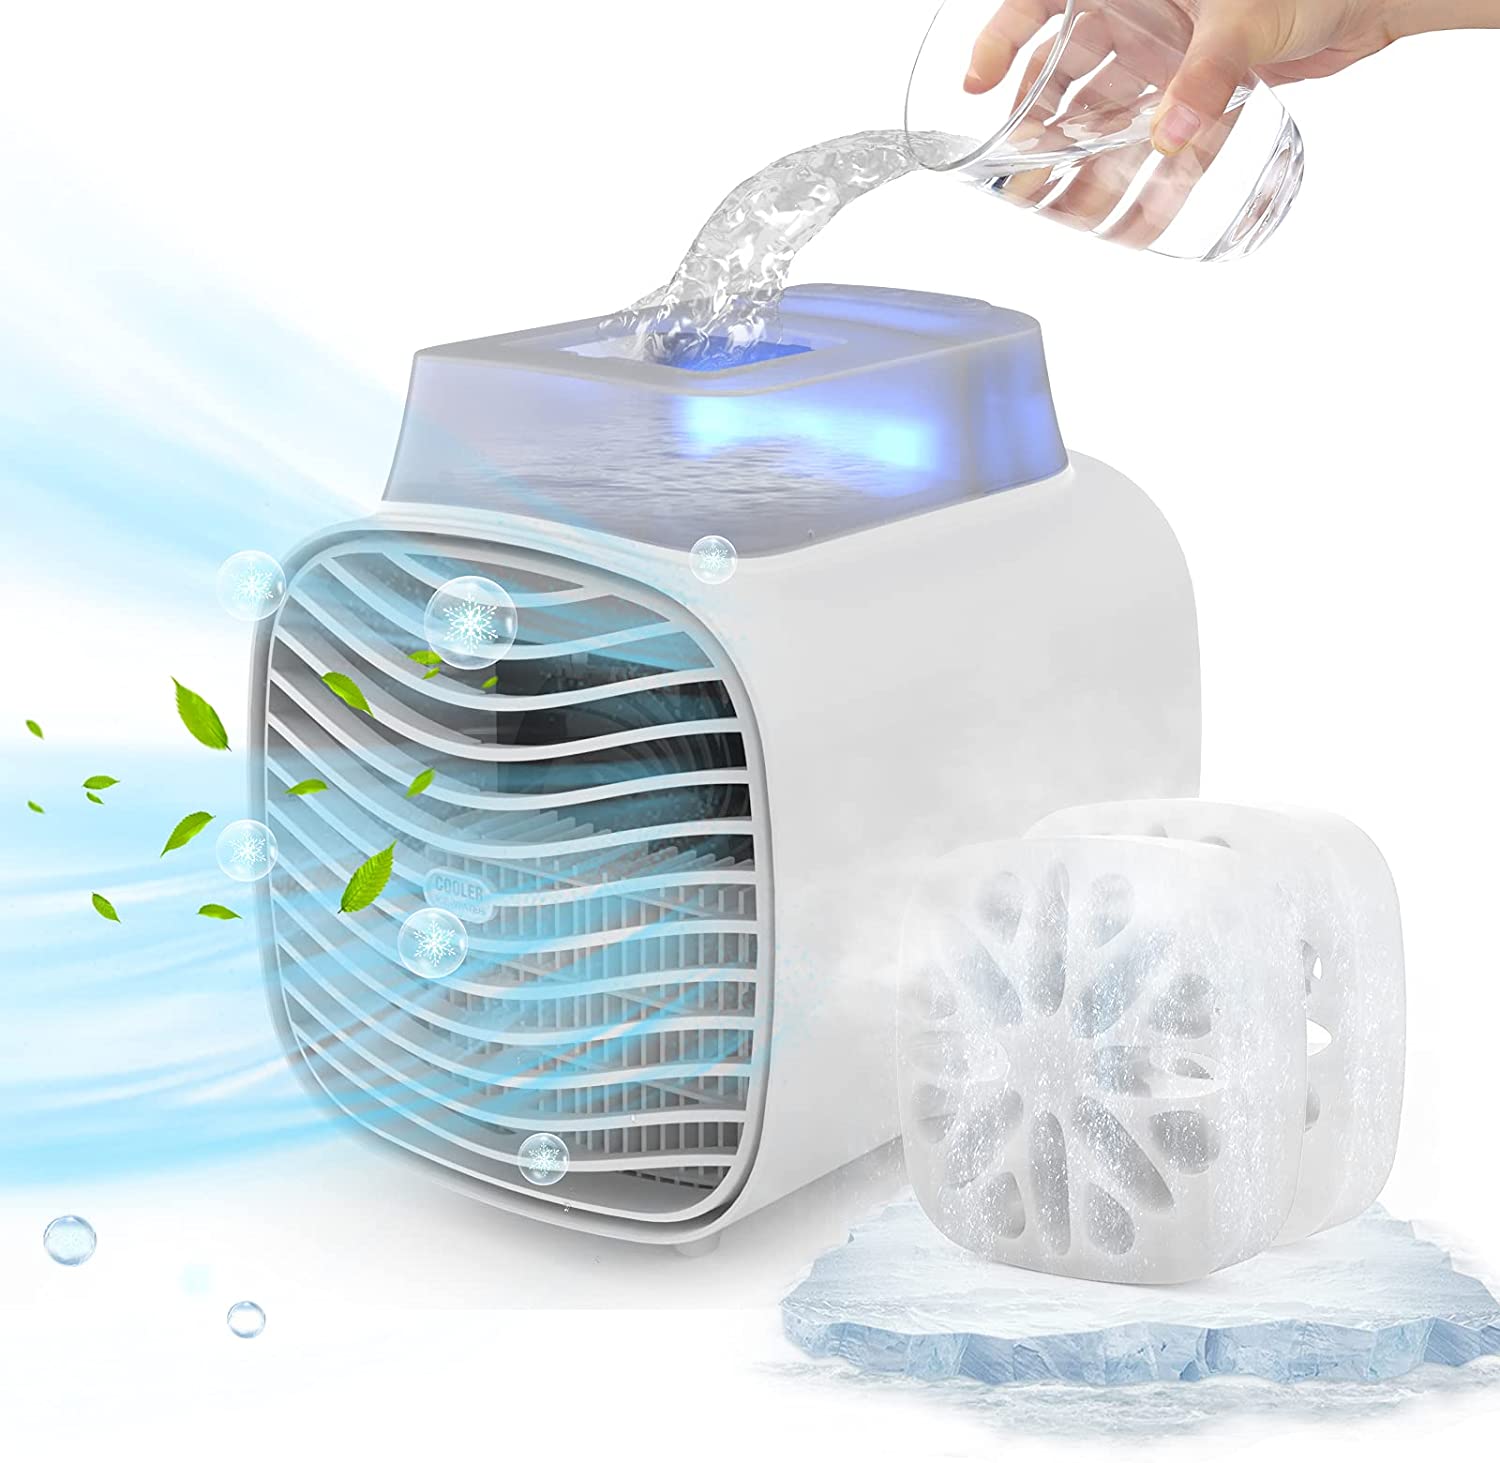 Portable Rechargeable Portable Air Conditioner - USB Led Light Portable AC Unit with 2 Ice Crystal Box & 465 ML Water Tank & 3 Wind Speeds Personal Air Conditioner for Home, Small Room, Office